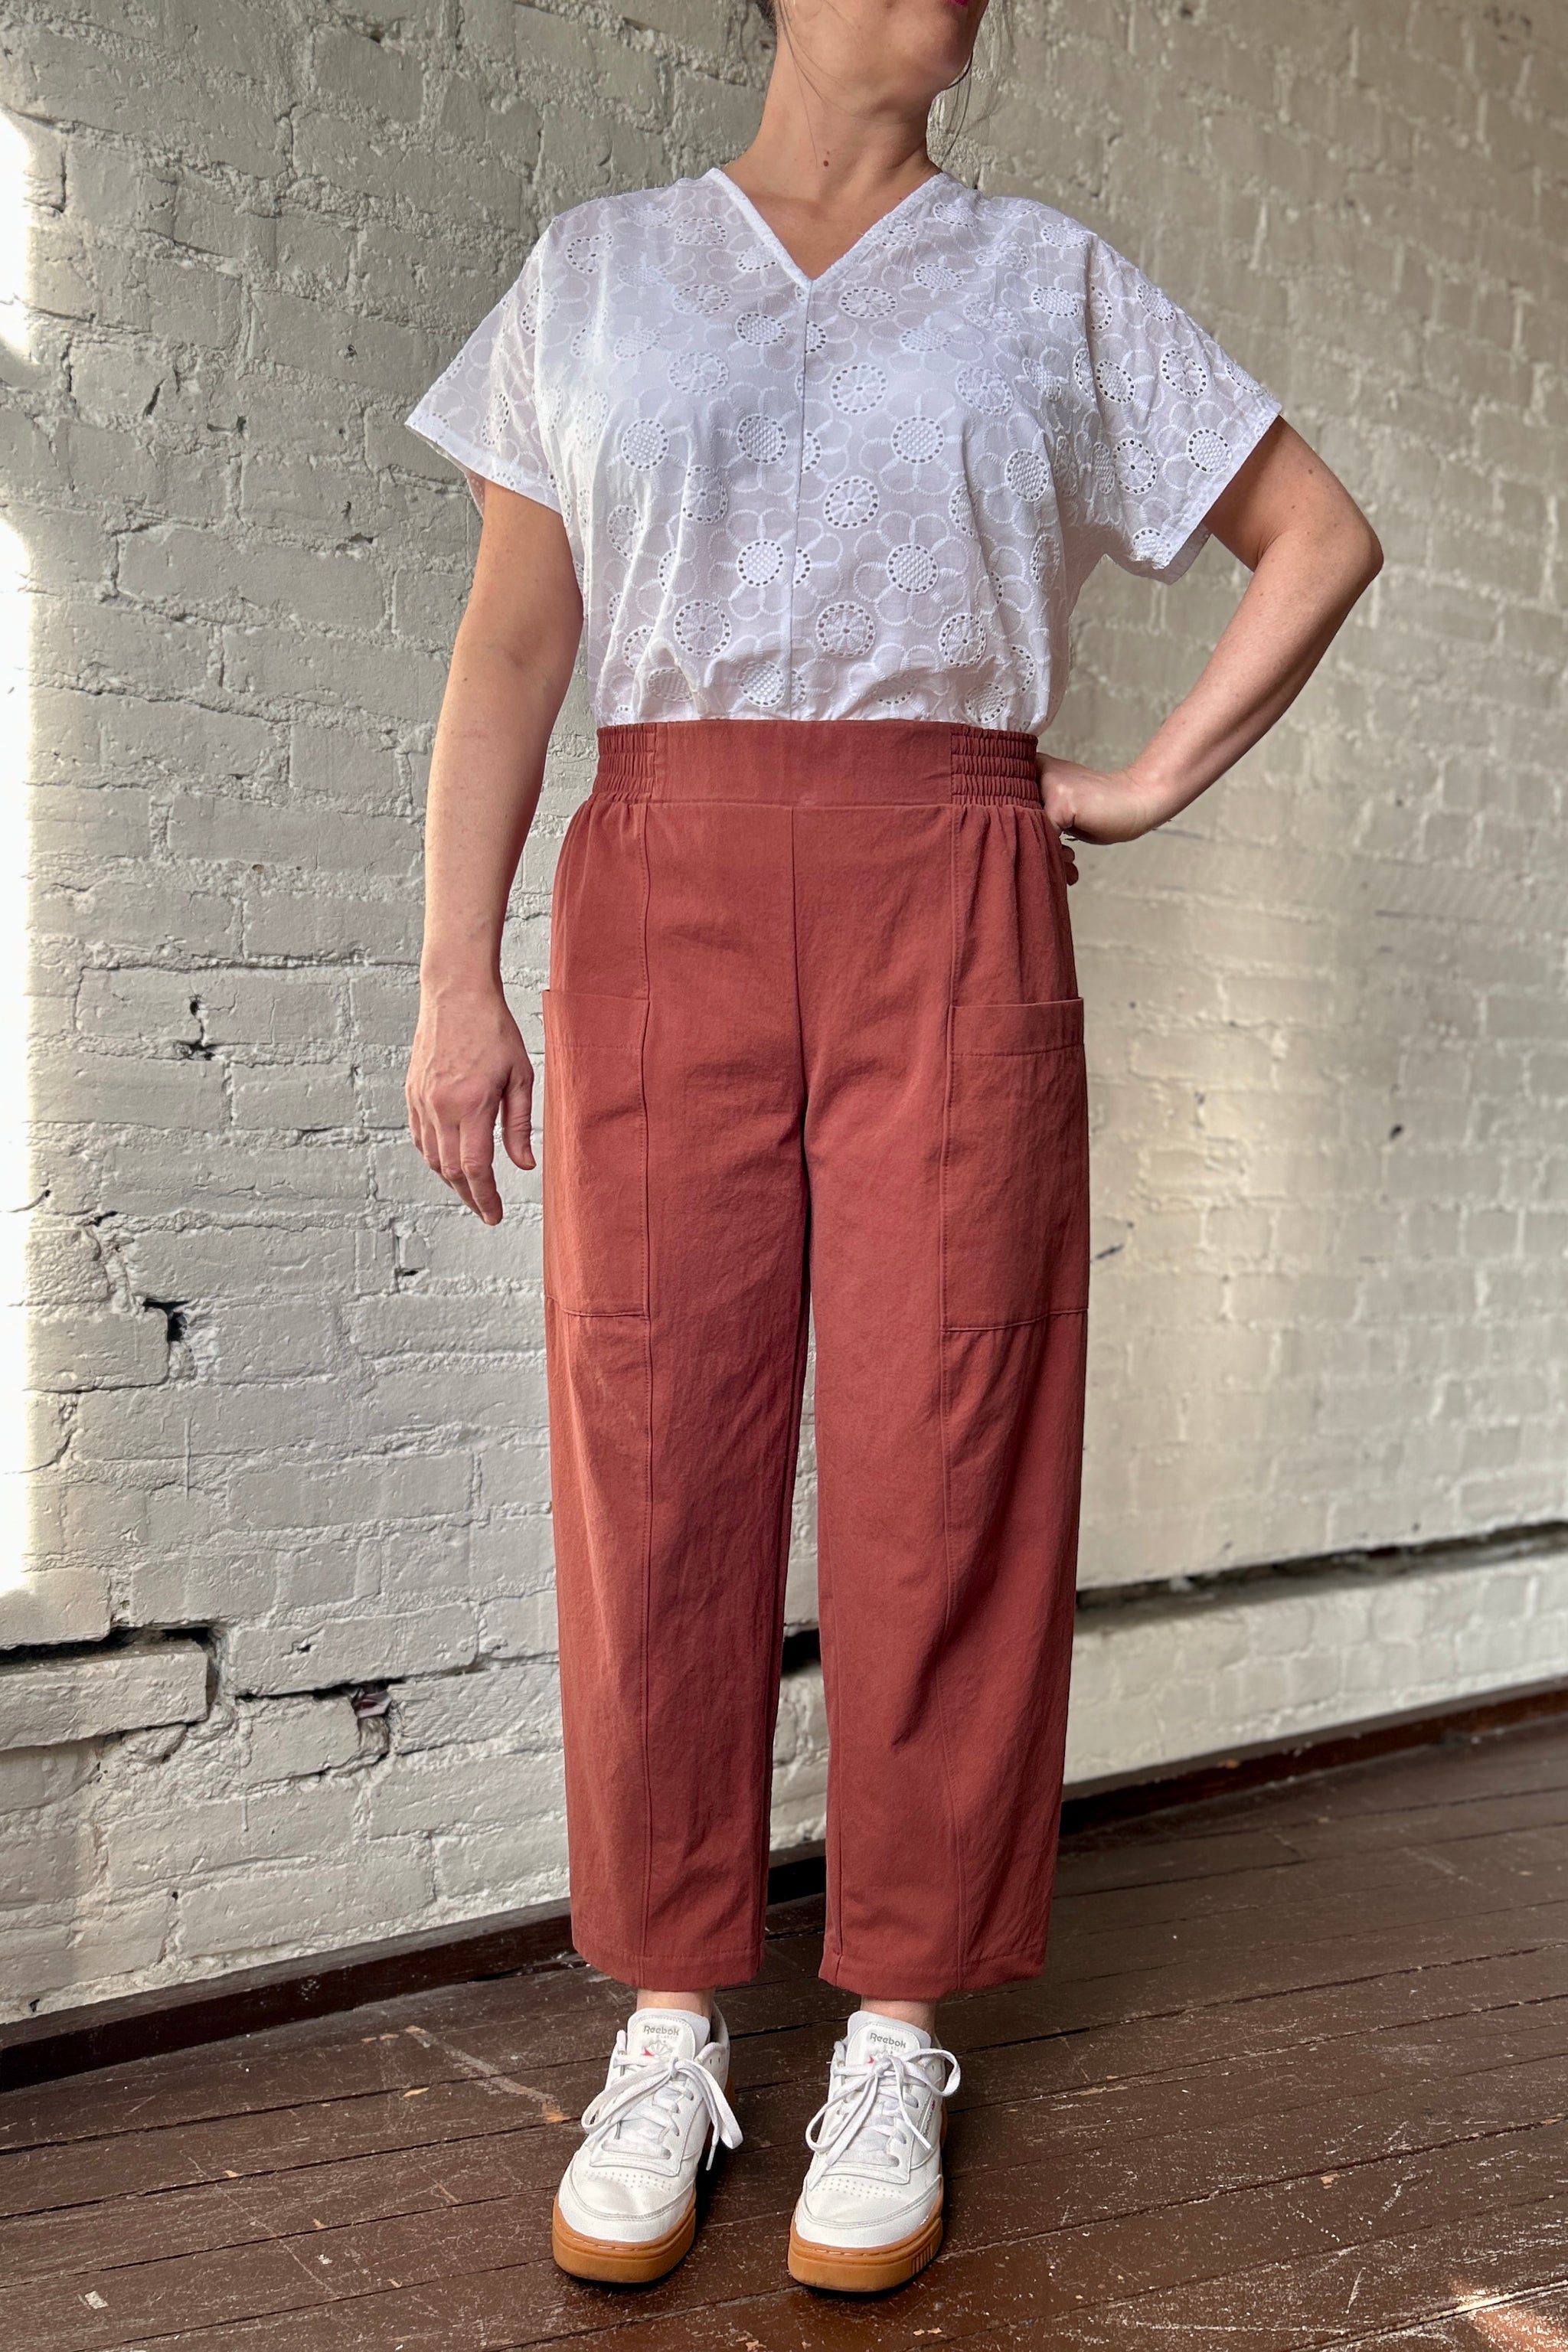 Person wears red-clay coloured cotton trousers and white eyelet blouse, standing with hand on hip. Pants have front seam, barrel leg, elastic waist with flat front, and deep utility pockets on front-side of legs.